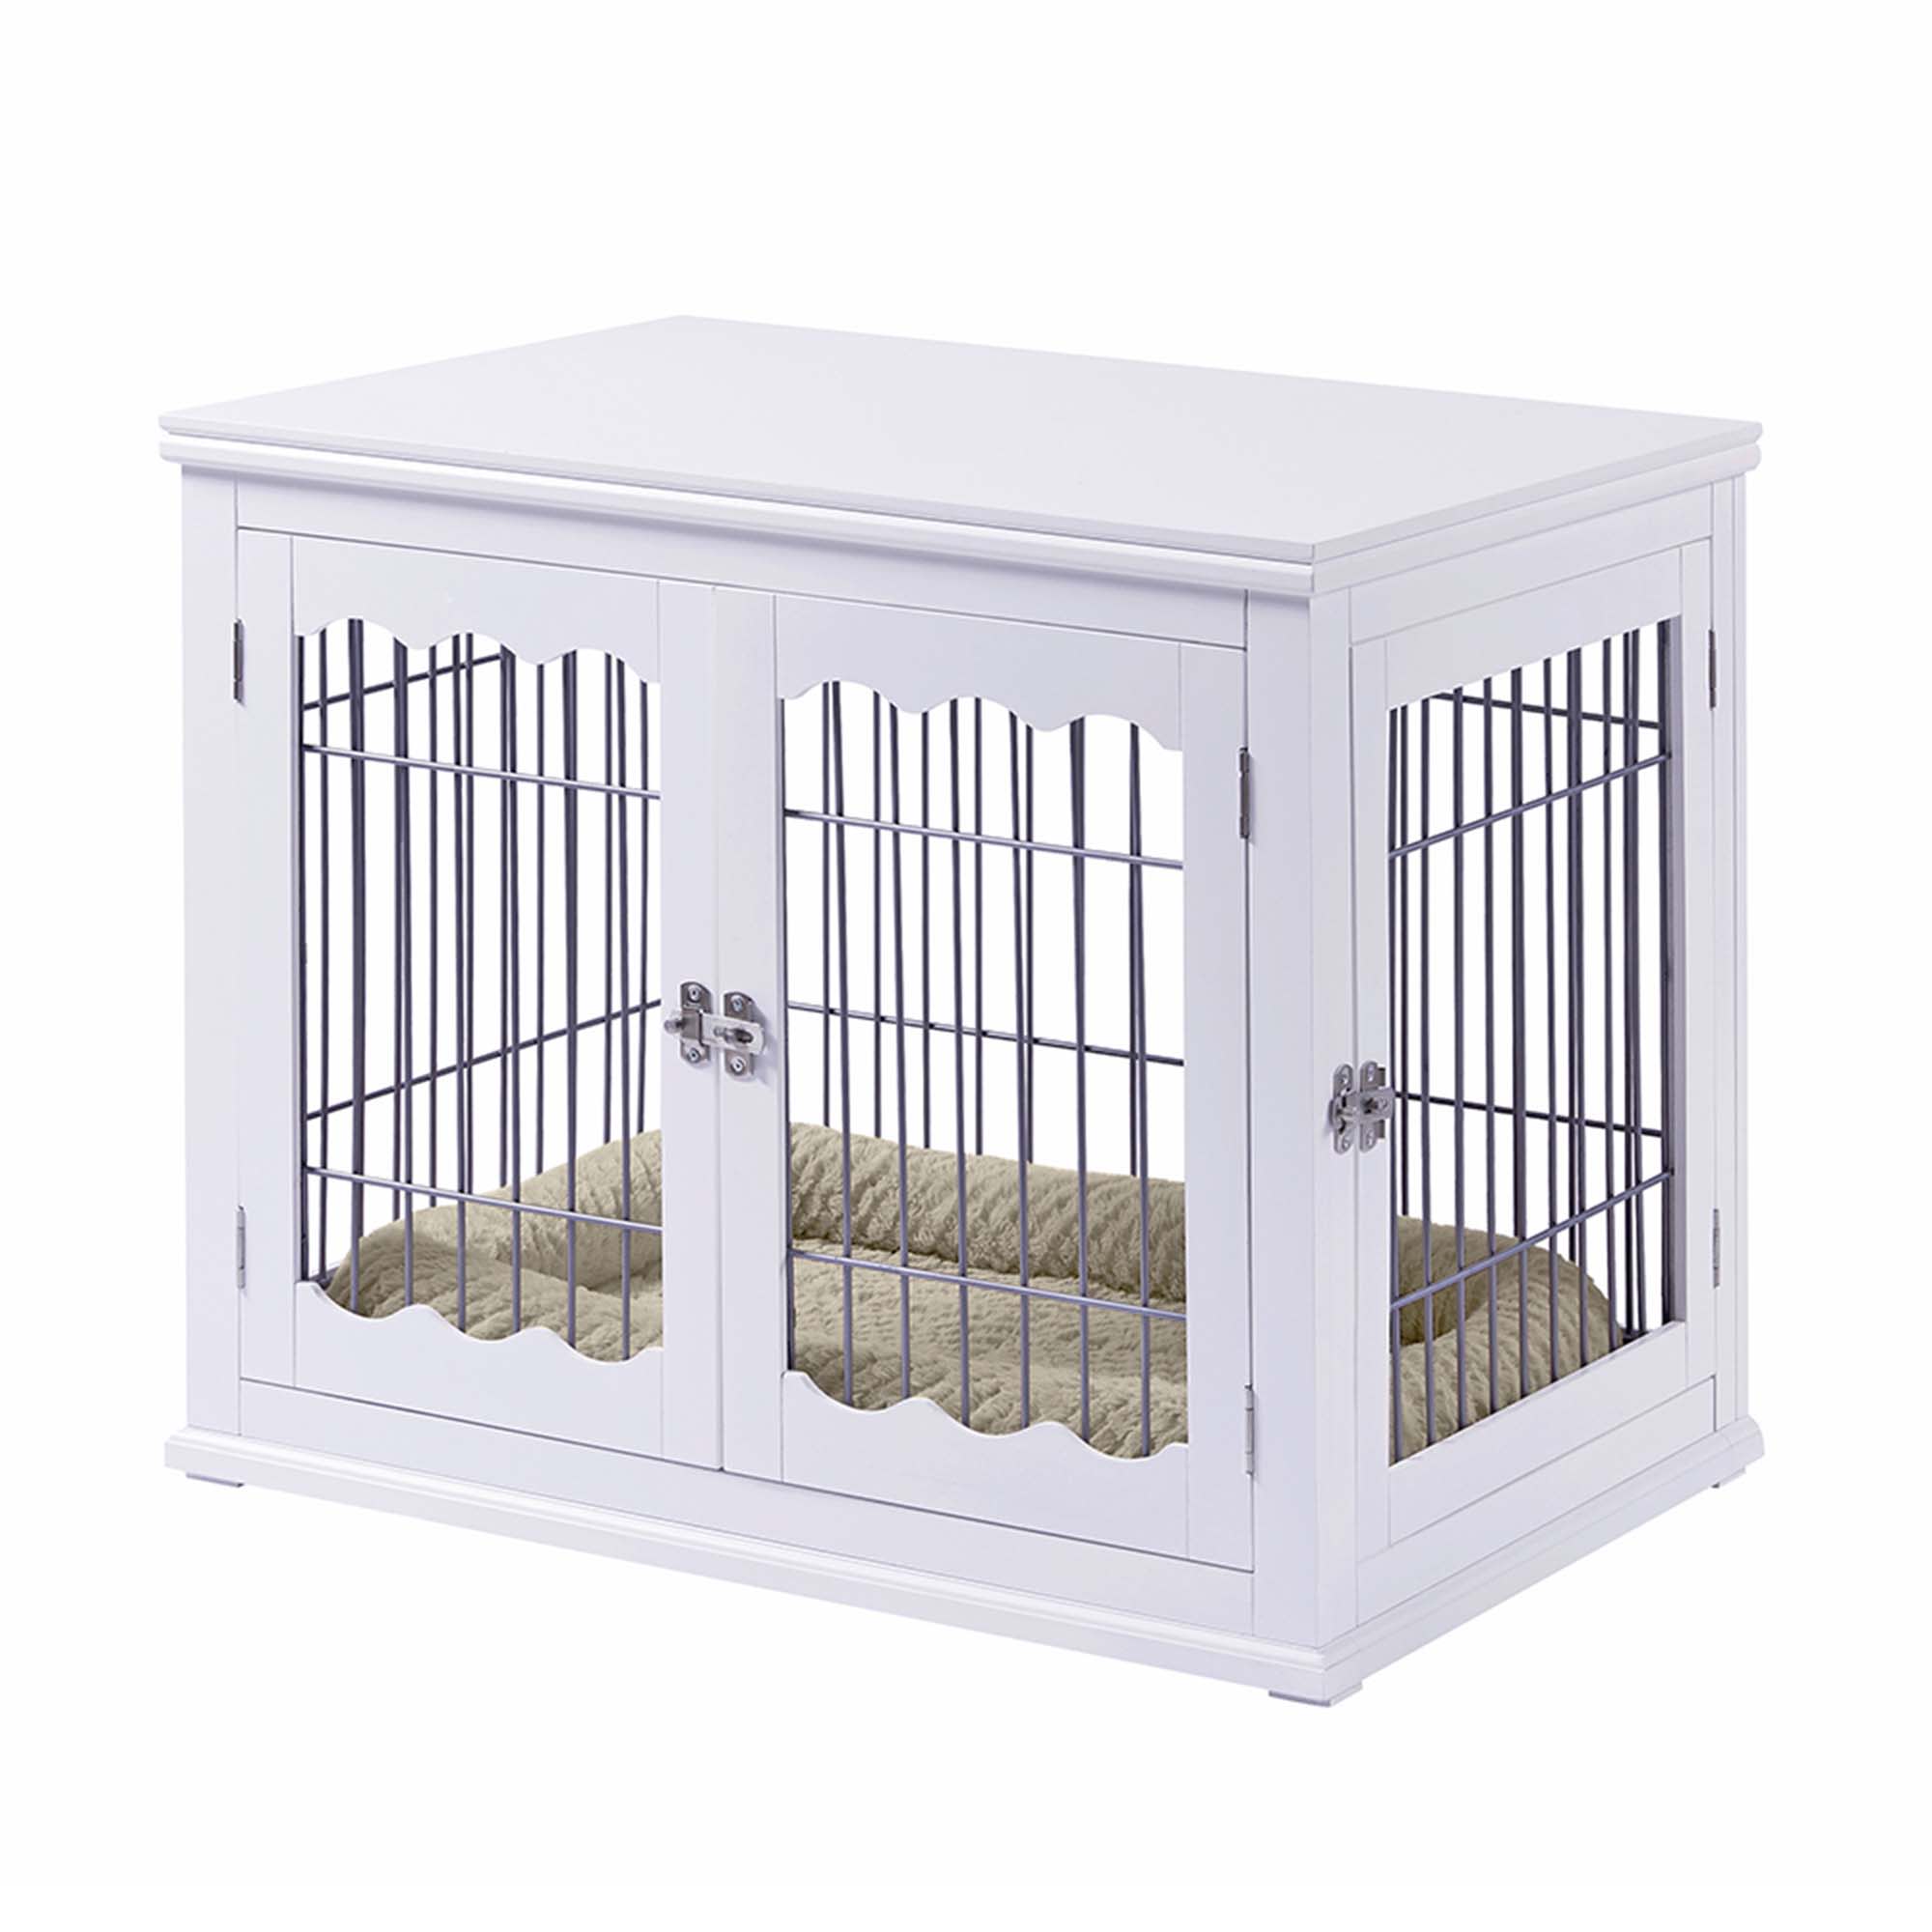 Unipaws Pet Crate with Pet Bed, Wooden Wire Dog Kennel in White, 32